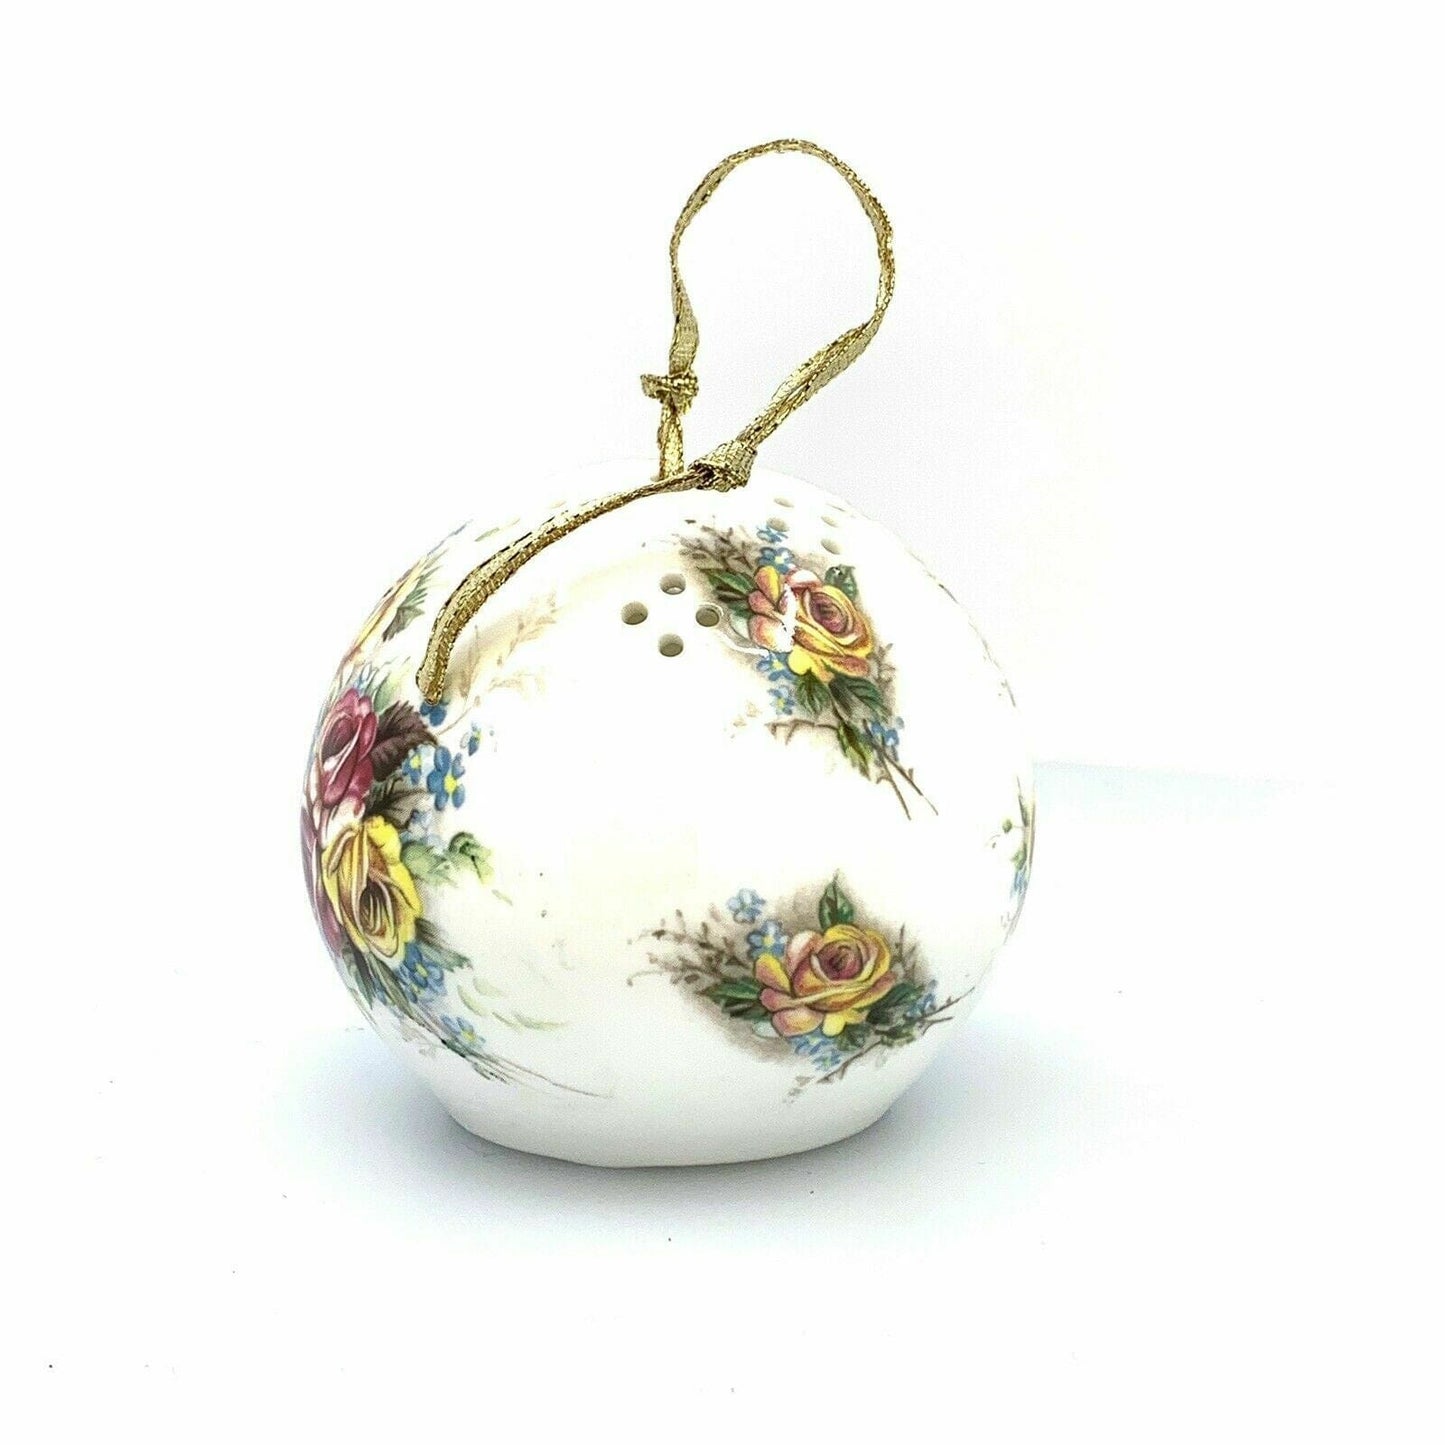 Exquisite Royal Windsor Fine Bone China Fragrance Diffuser Ornament - Charming - Very Good - Unisex